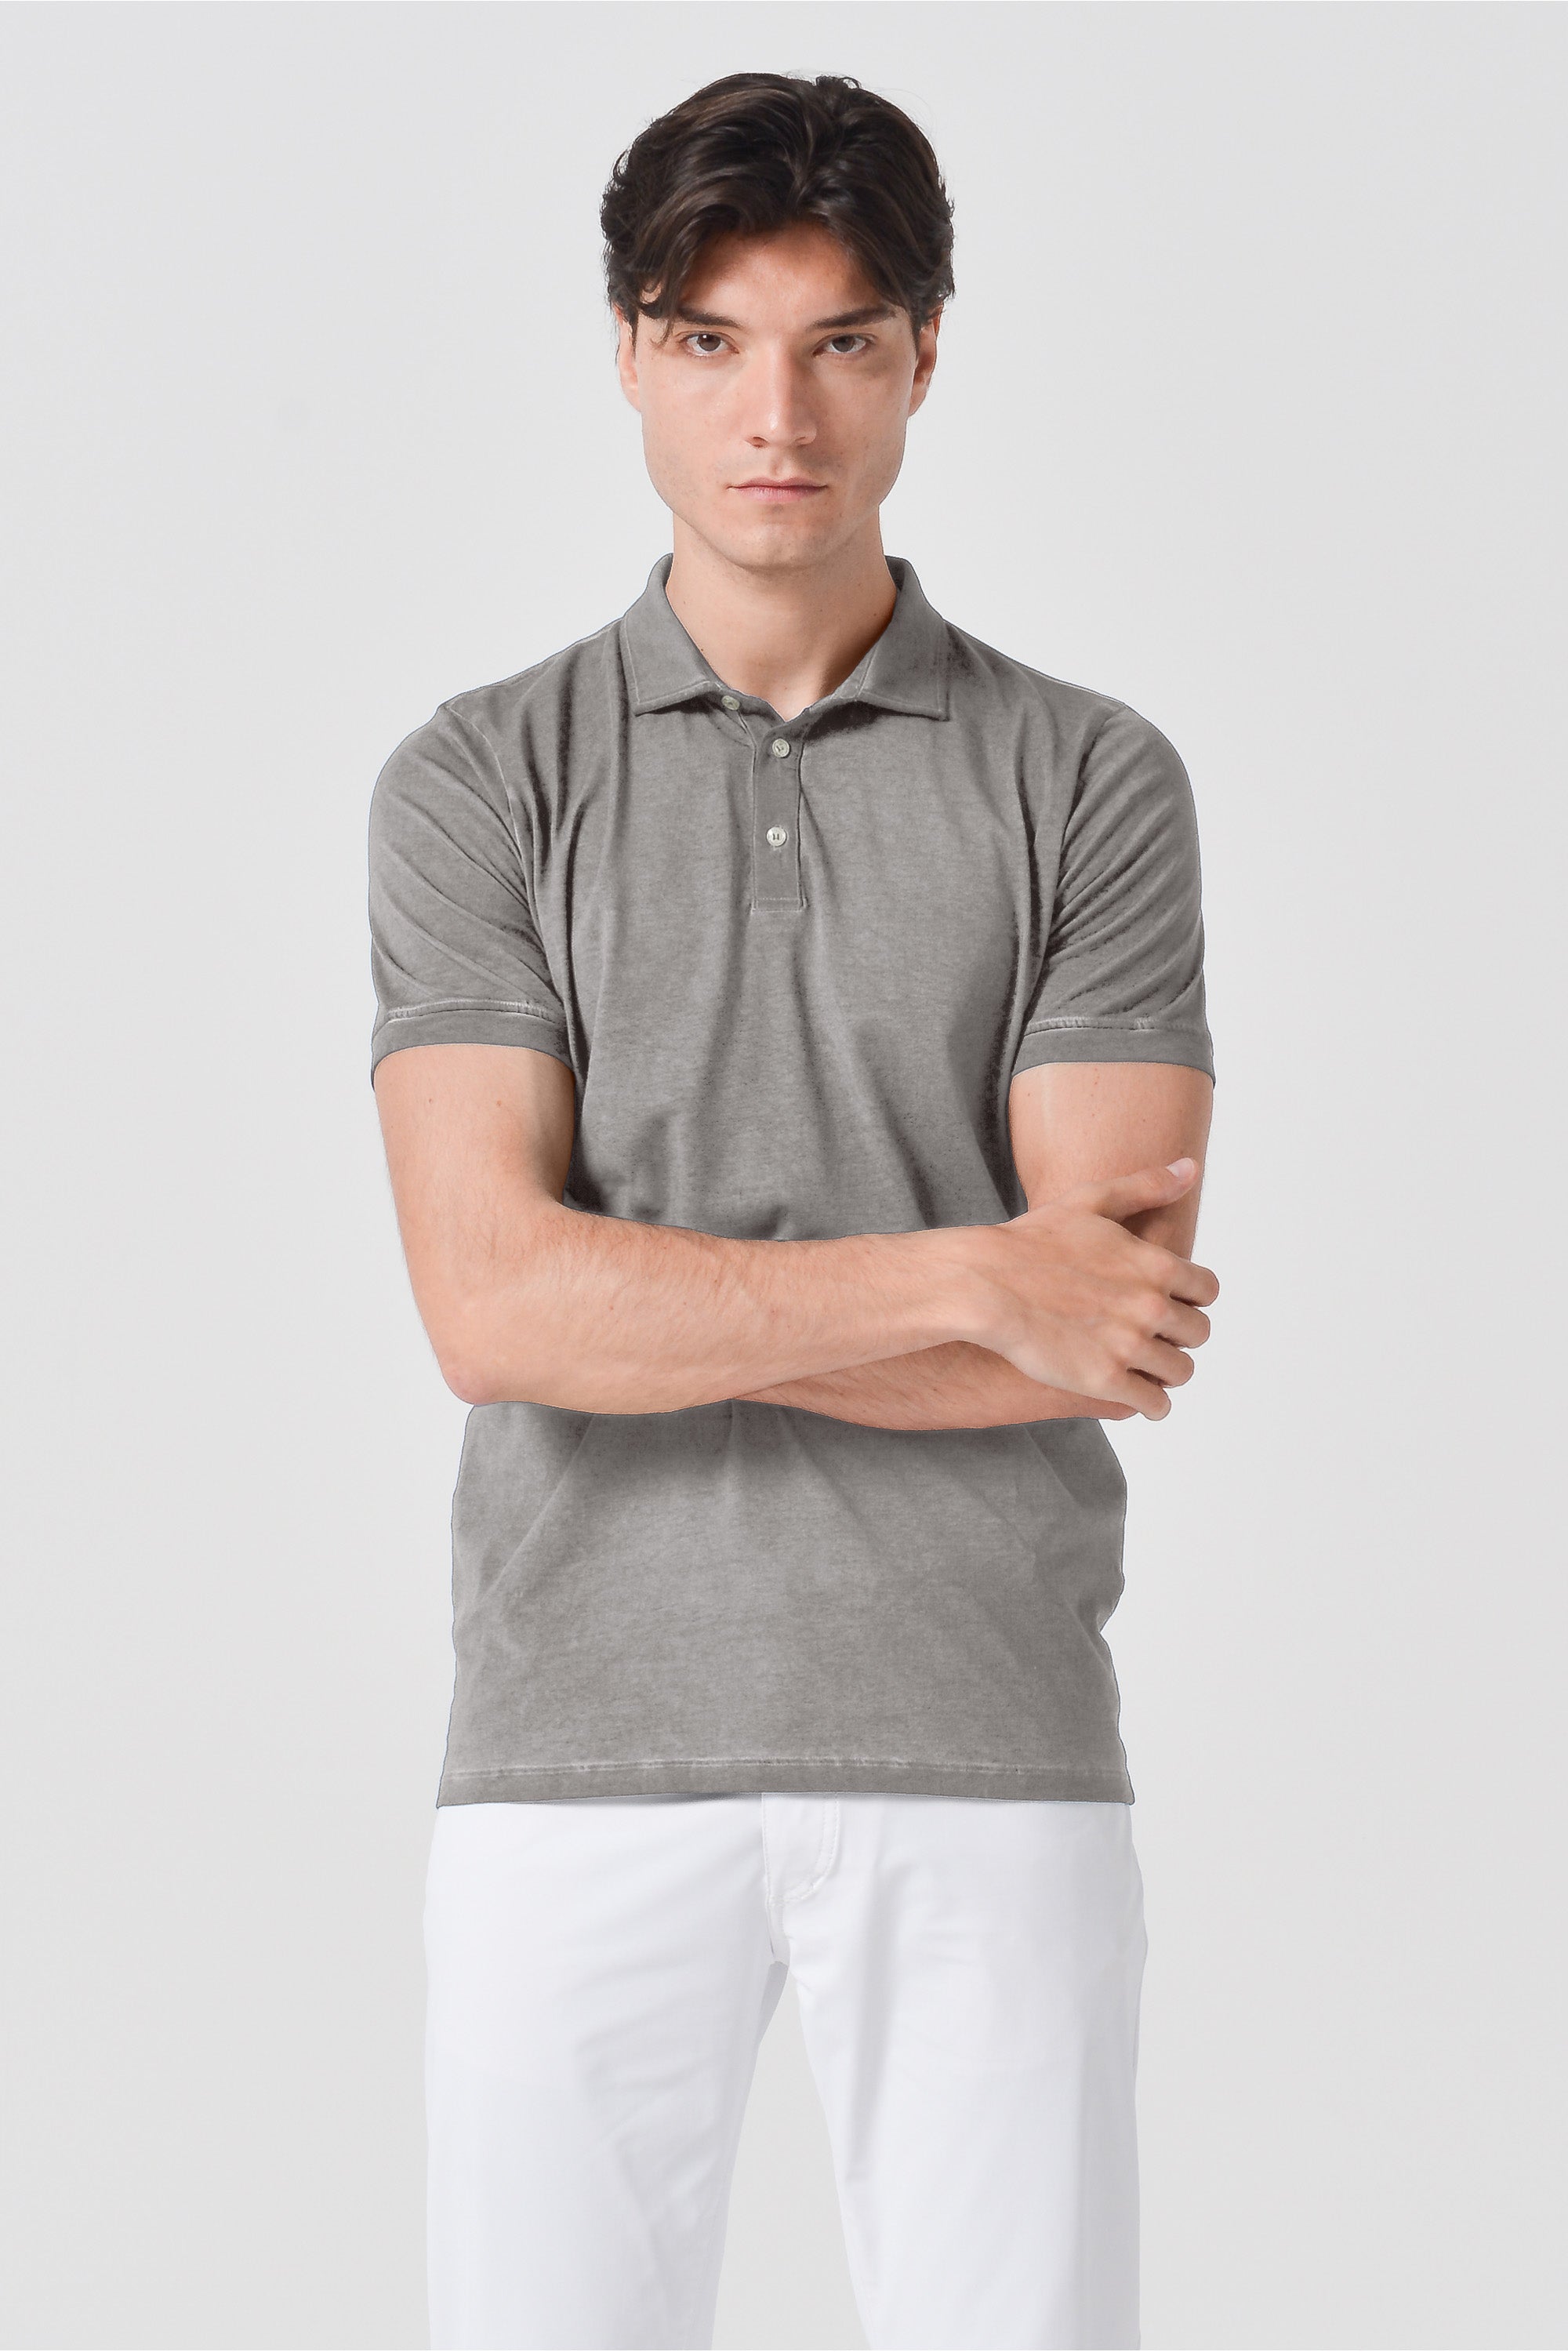 Performance Polo in Steel